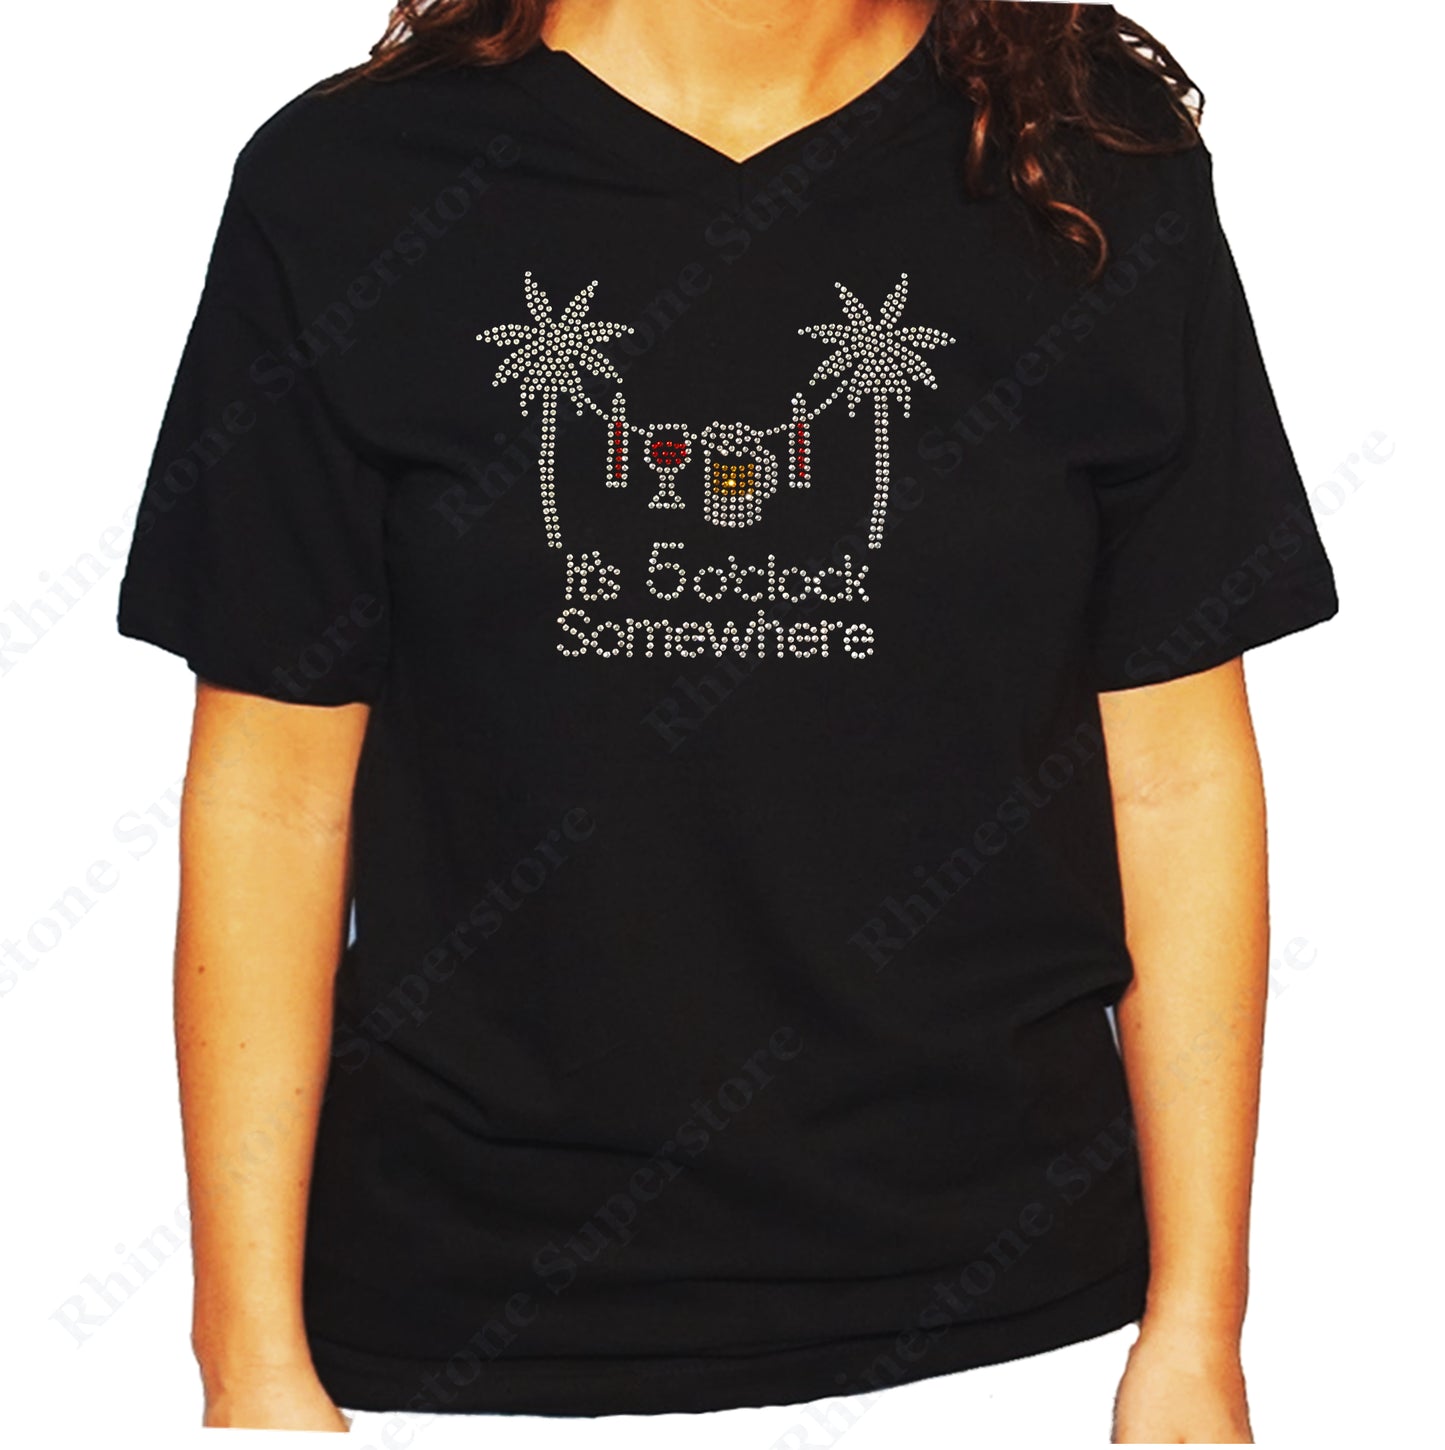 Women's / Unisex T-Shirt with it's 5 O'Clock Somewhere with Palms in Rhinestones